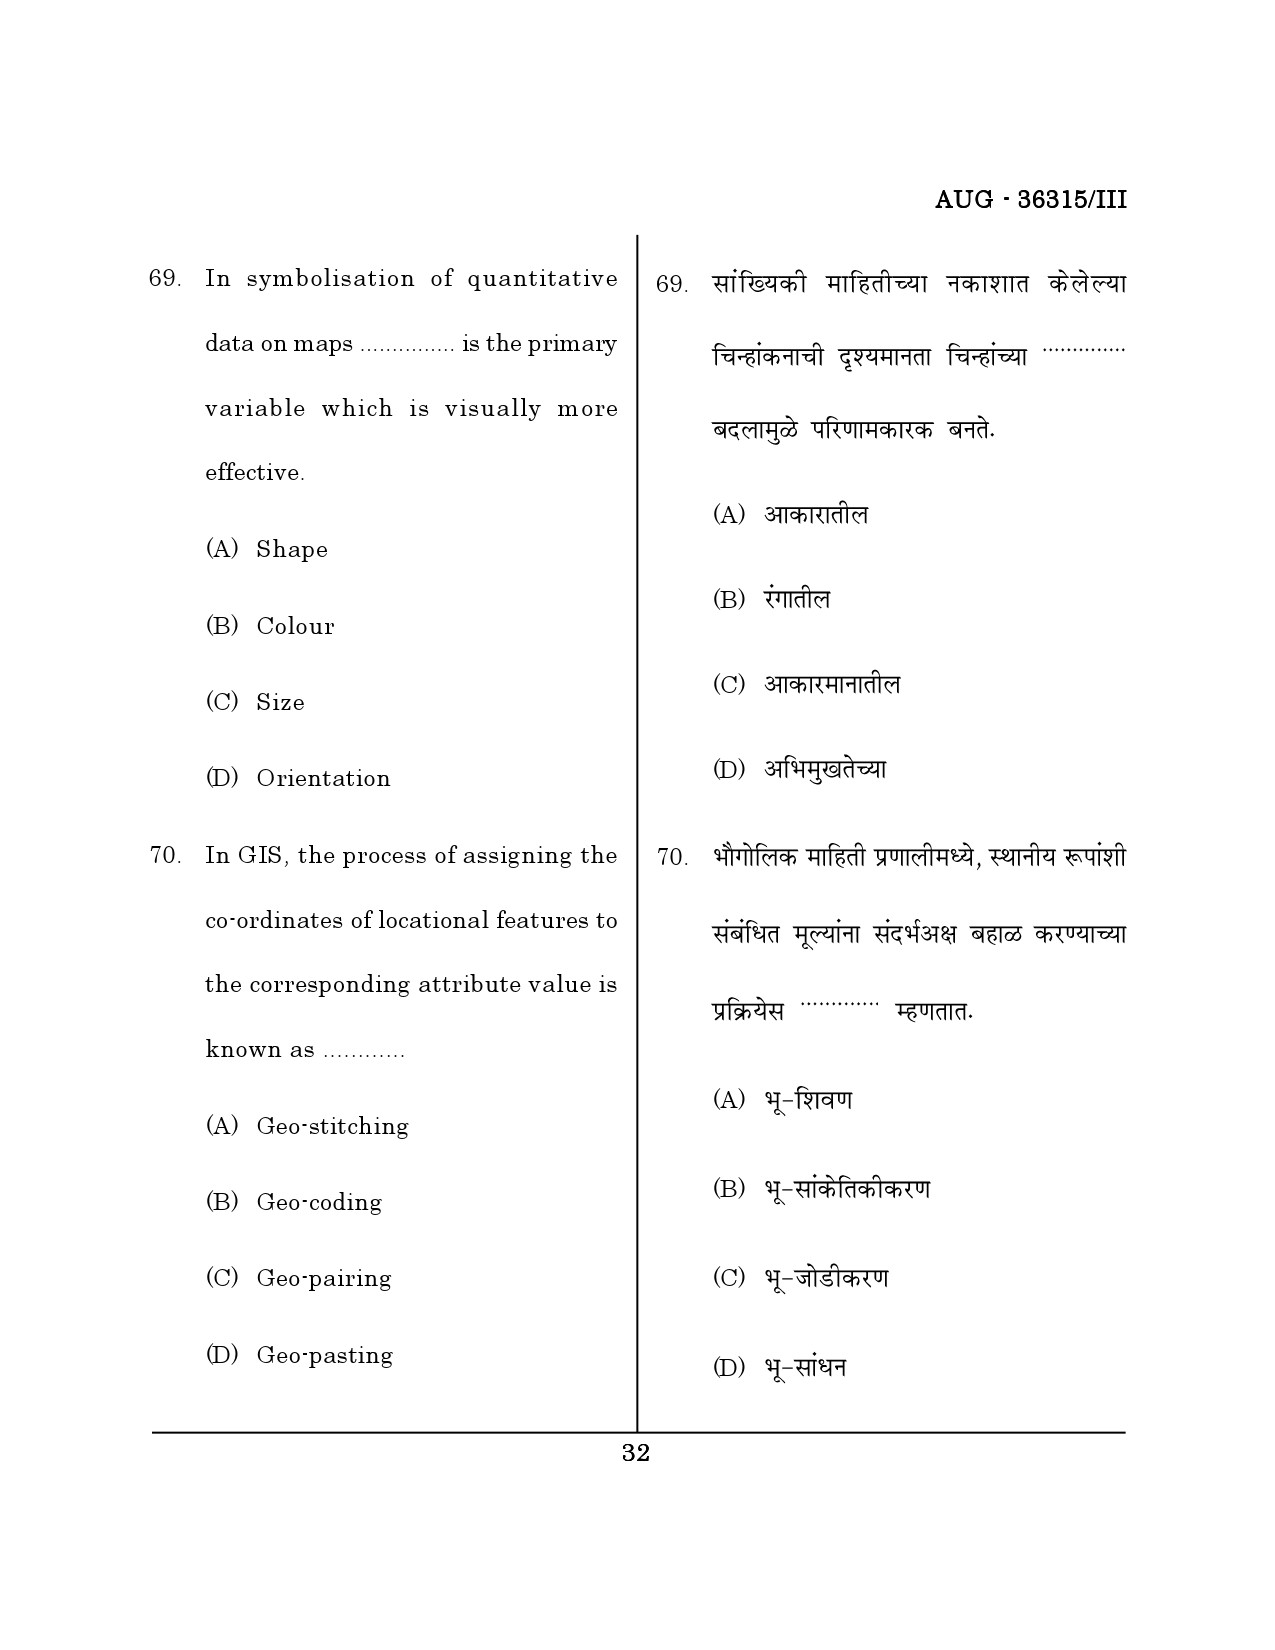 Maharashtra SET Geography Question Paper III August 2015 31